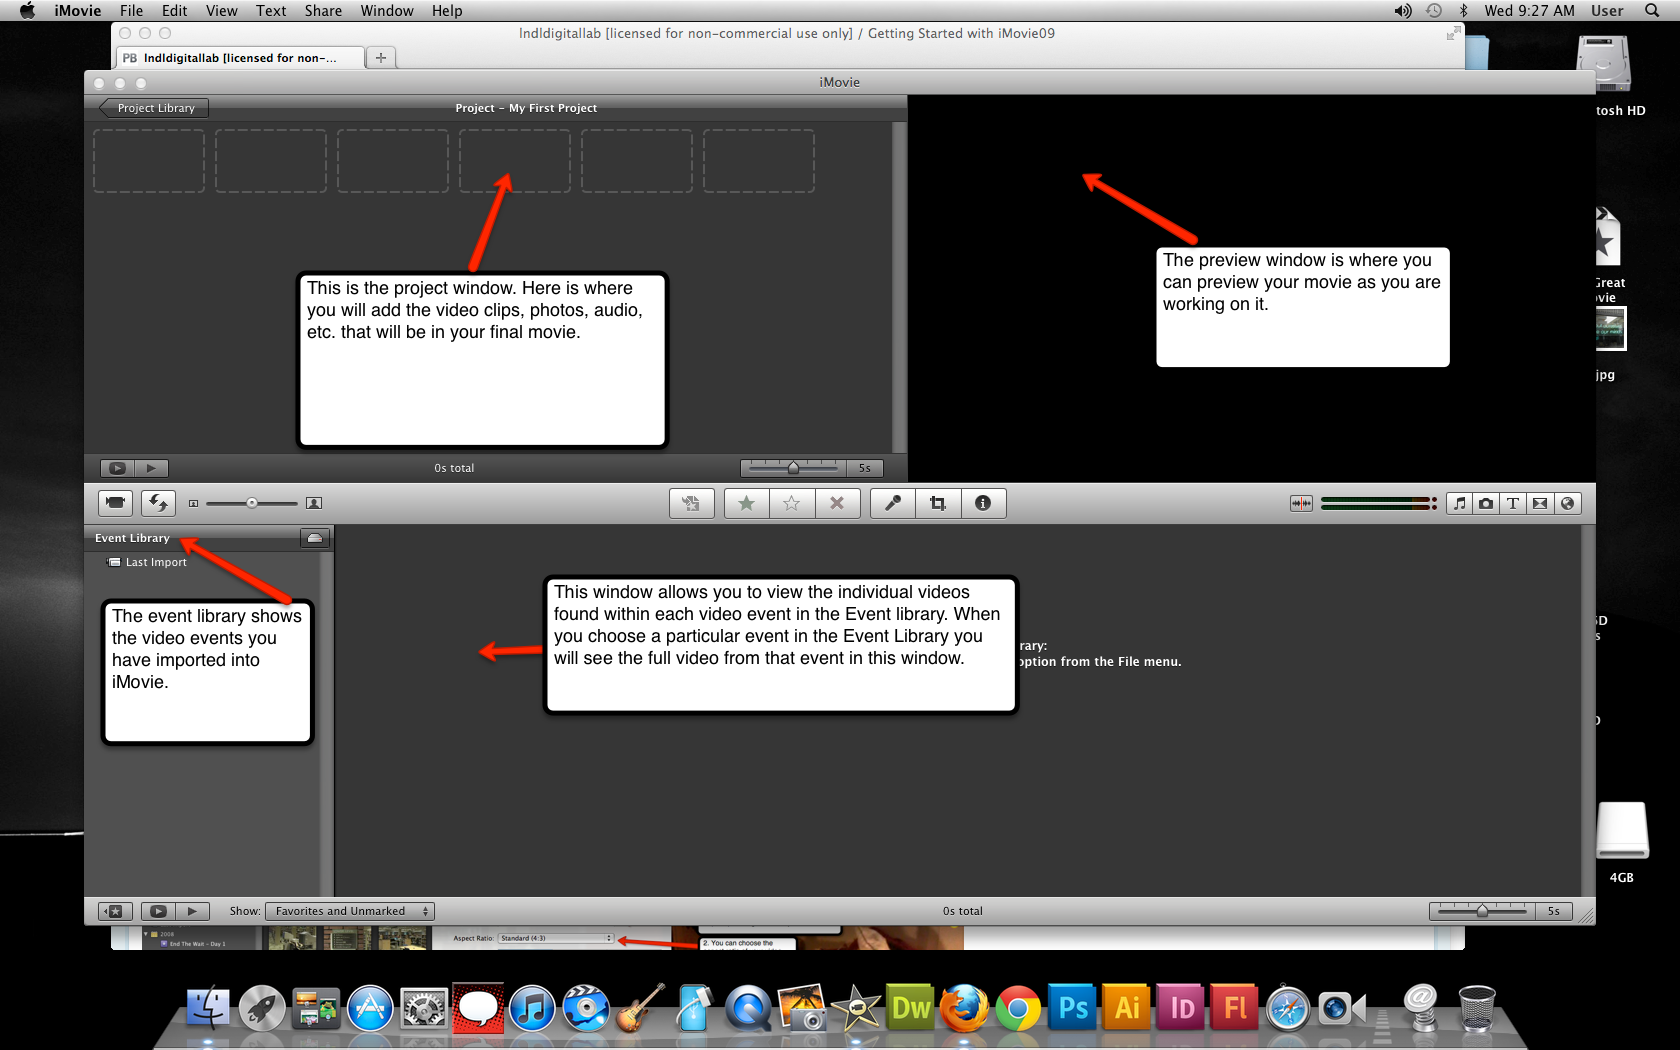 Visual guide on getting started in iMovie '11